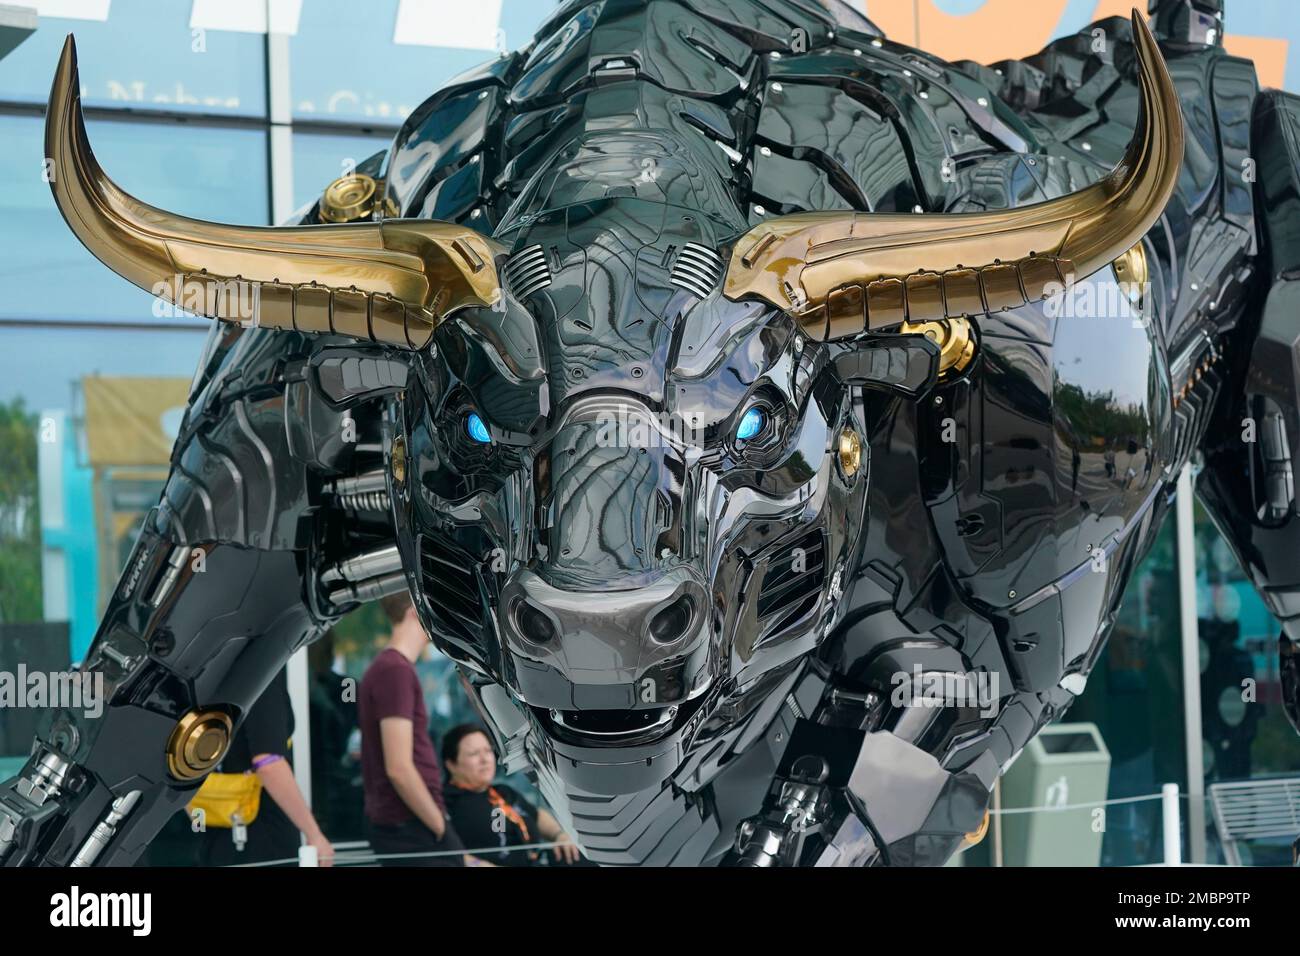 The Miami Bull is shown, Wednesday, April 6, 2022, at the Miami Beach  Convention Center in Miami Beach, Fla. The robot-like statue of a bull is  meant to emulate Wall Street's "Charging